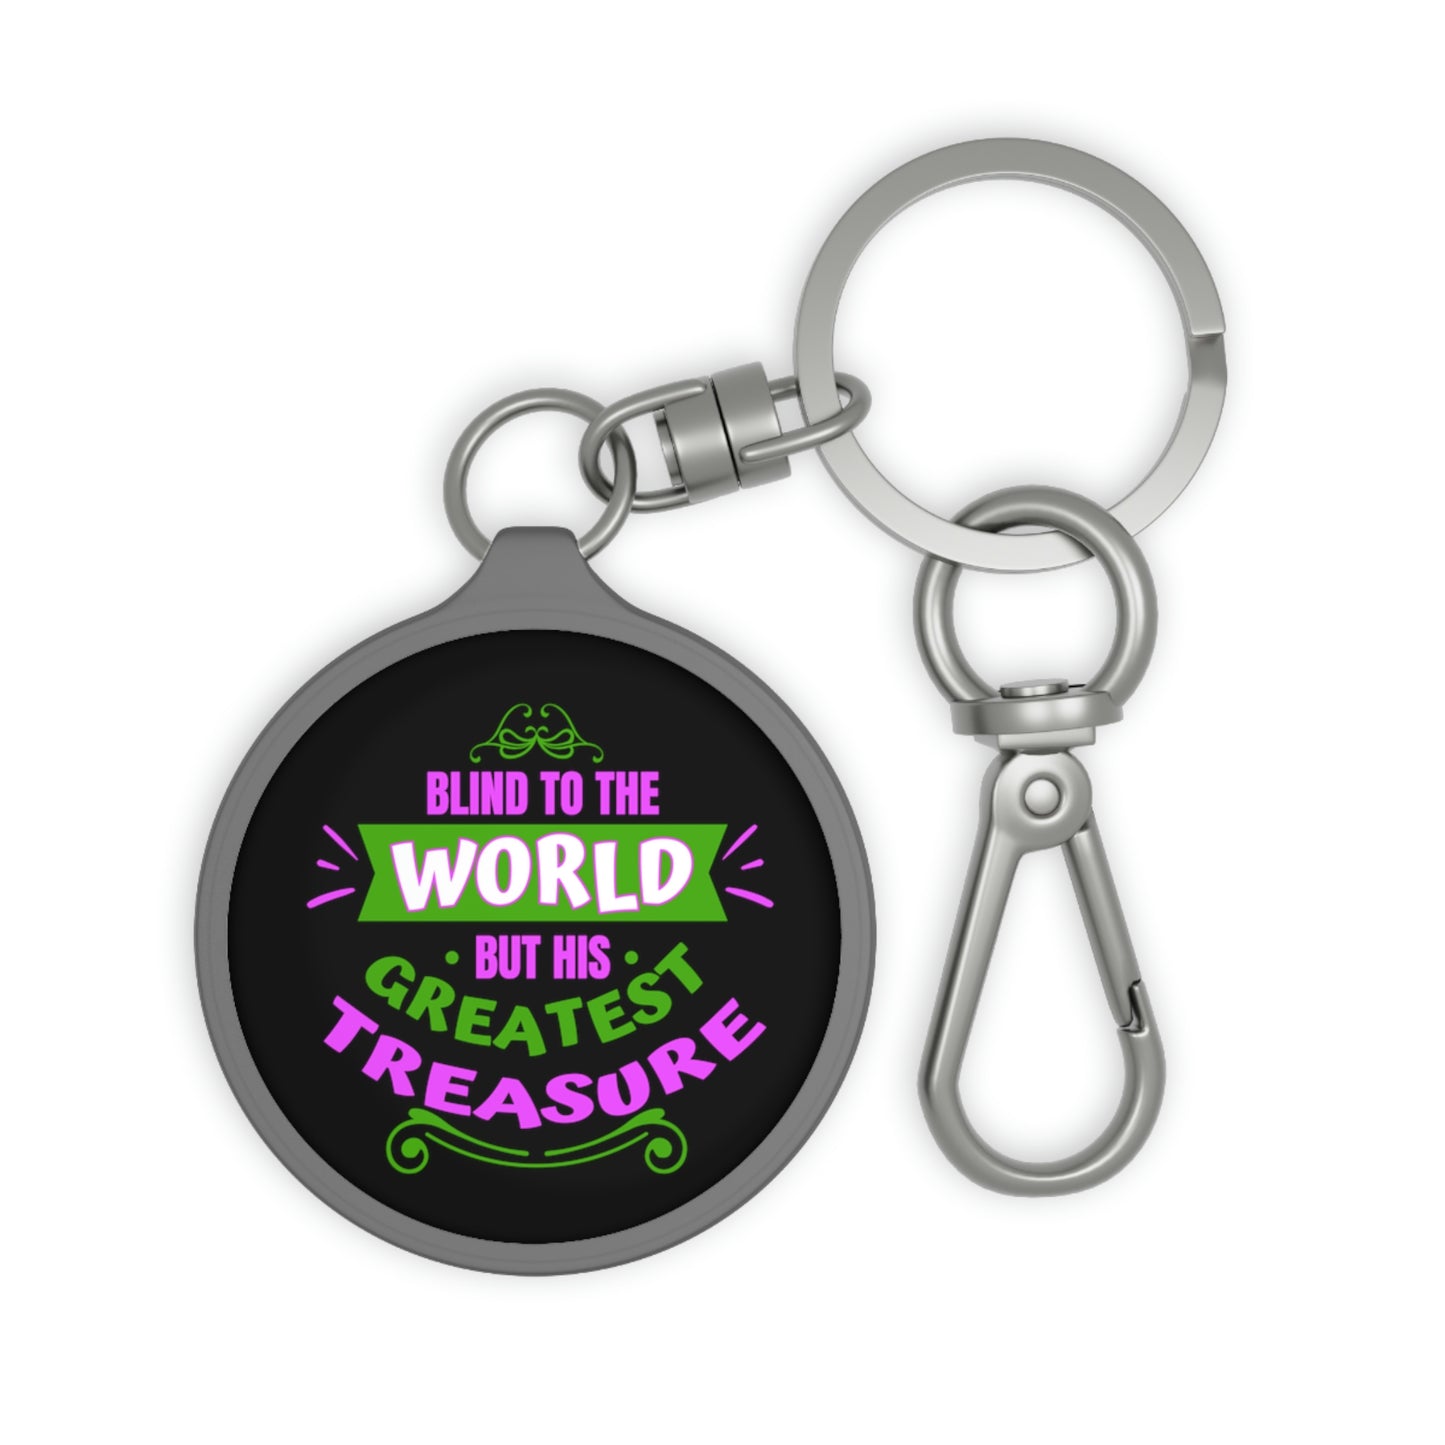 Blind To The World But His Greatest Treasure Key Fob